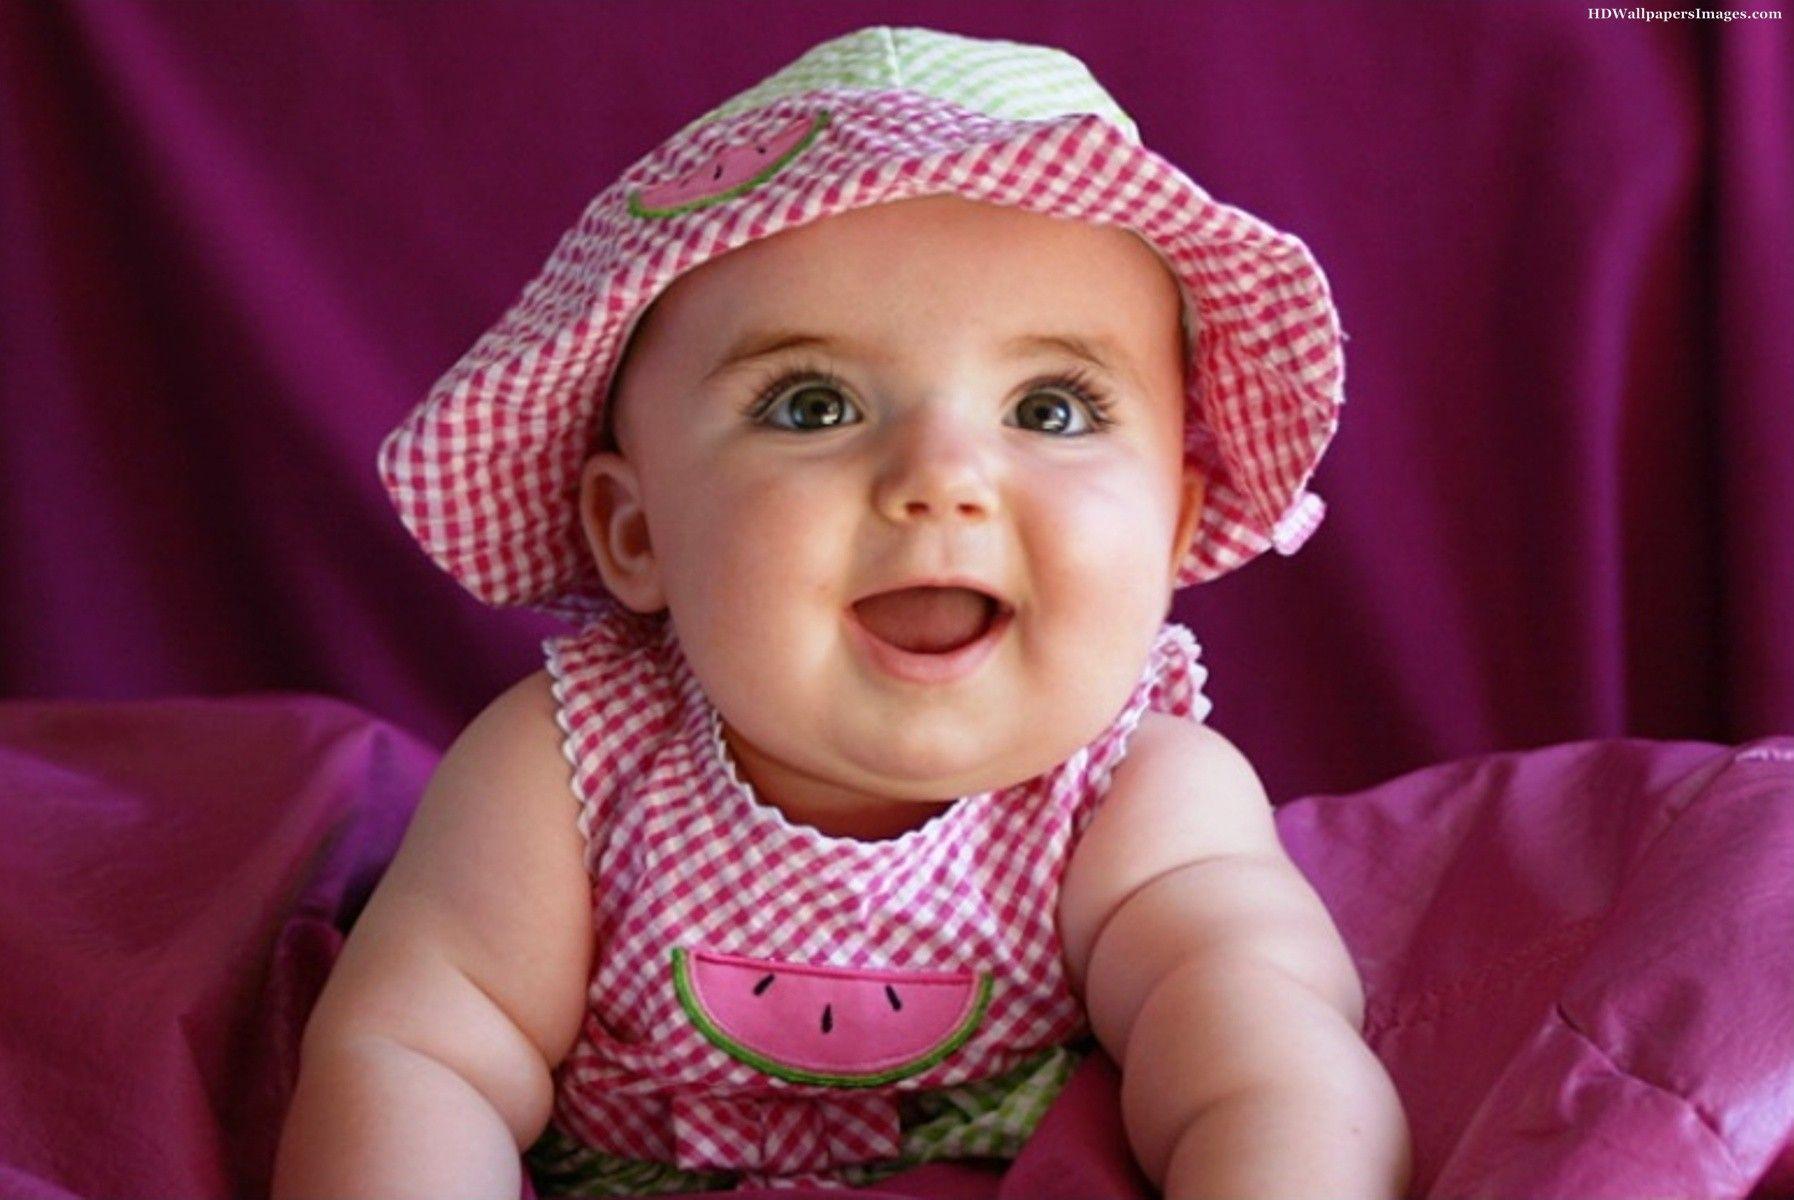 Baby Smile Wallpapers - Top Free Baby Smile Backgrounds - WallpaperAccess